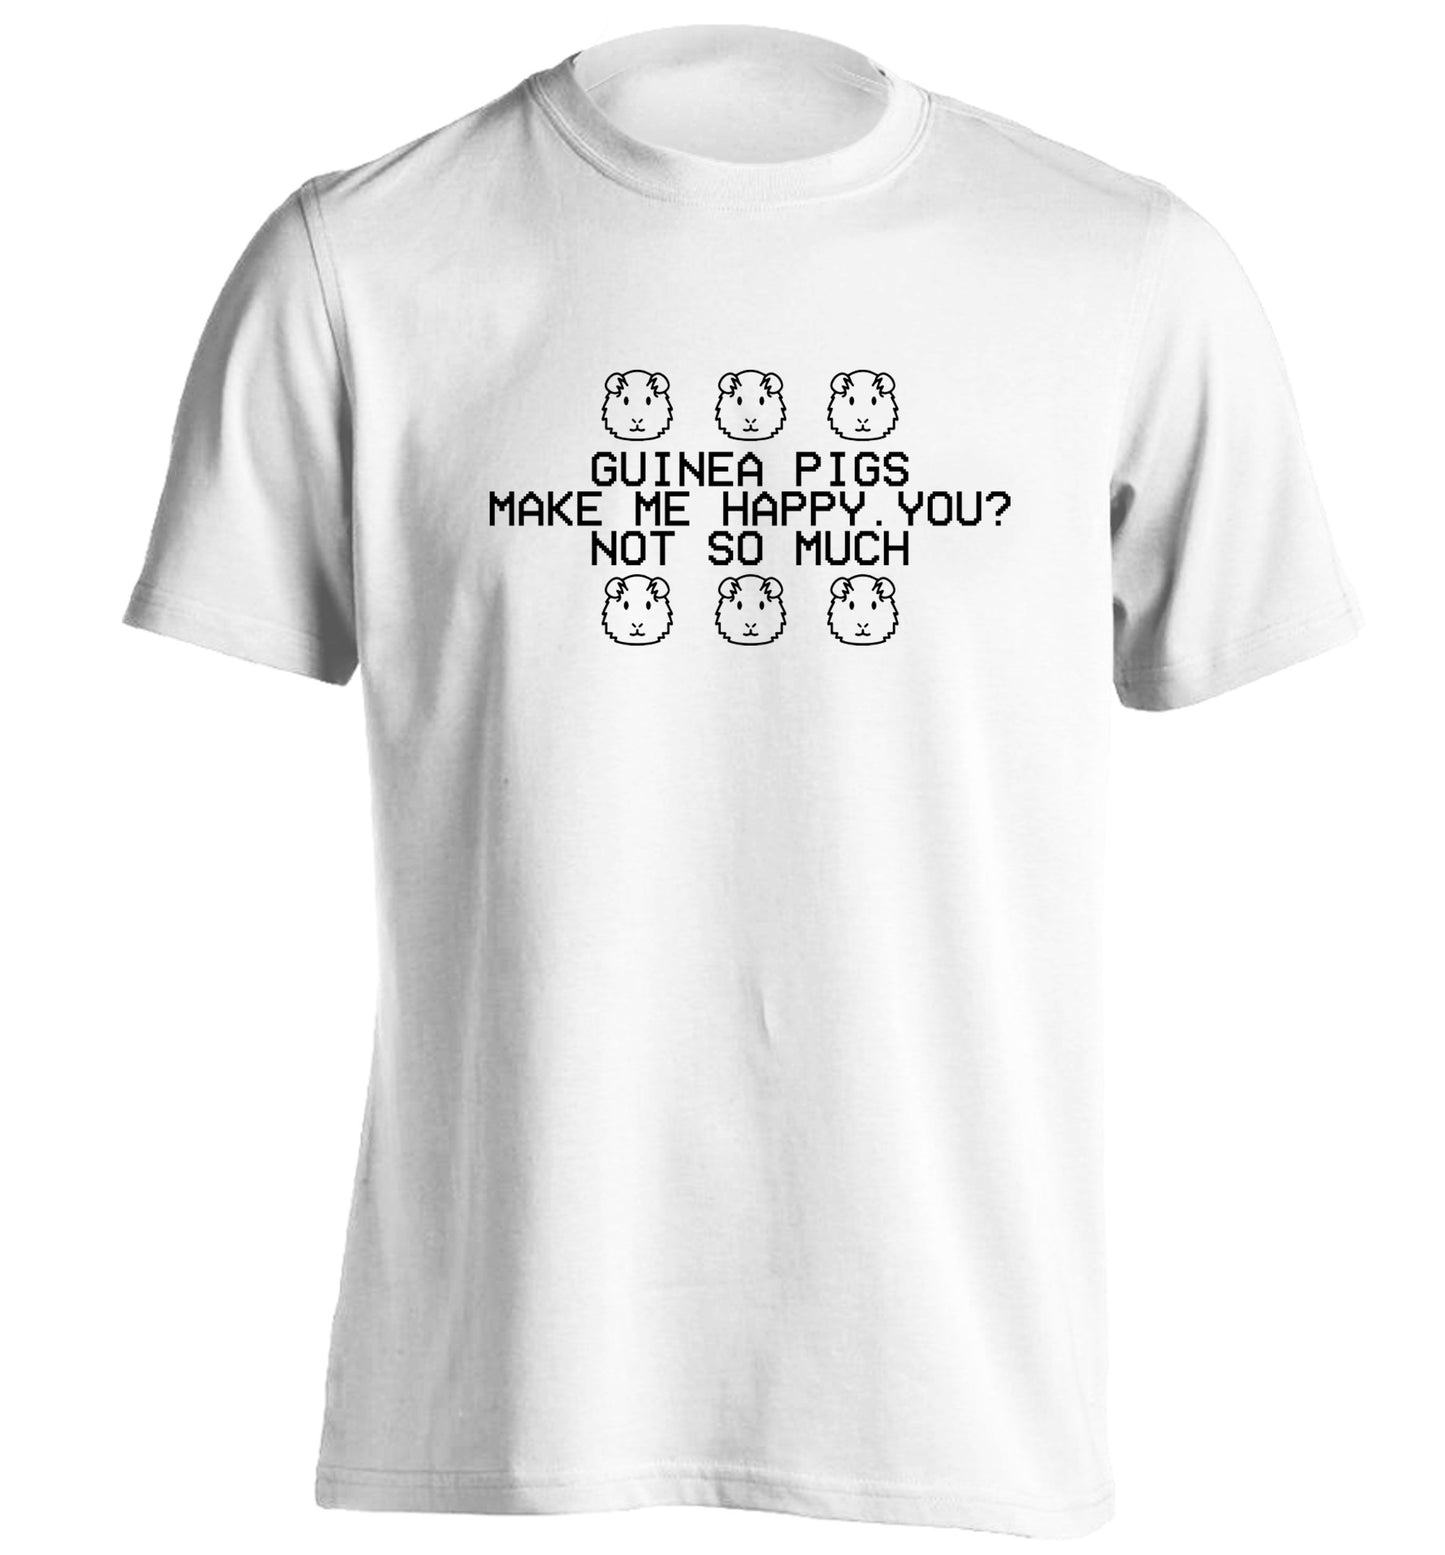 Guinea pigs make me happy, you not so much adults unisex white Tshirt 2XL